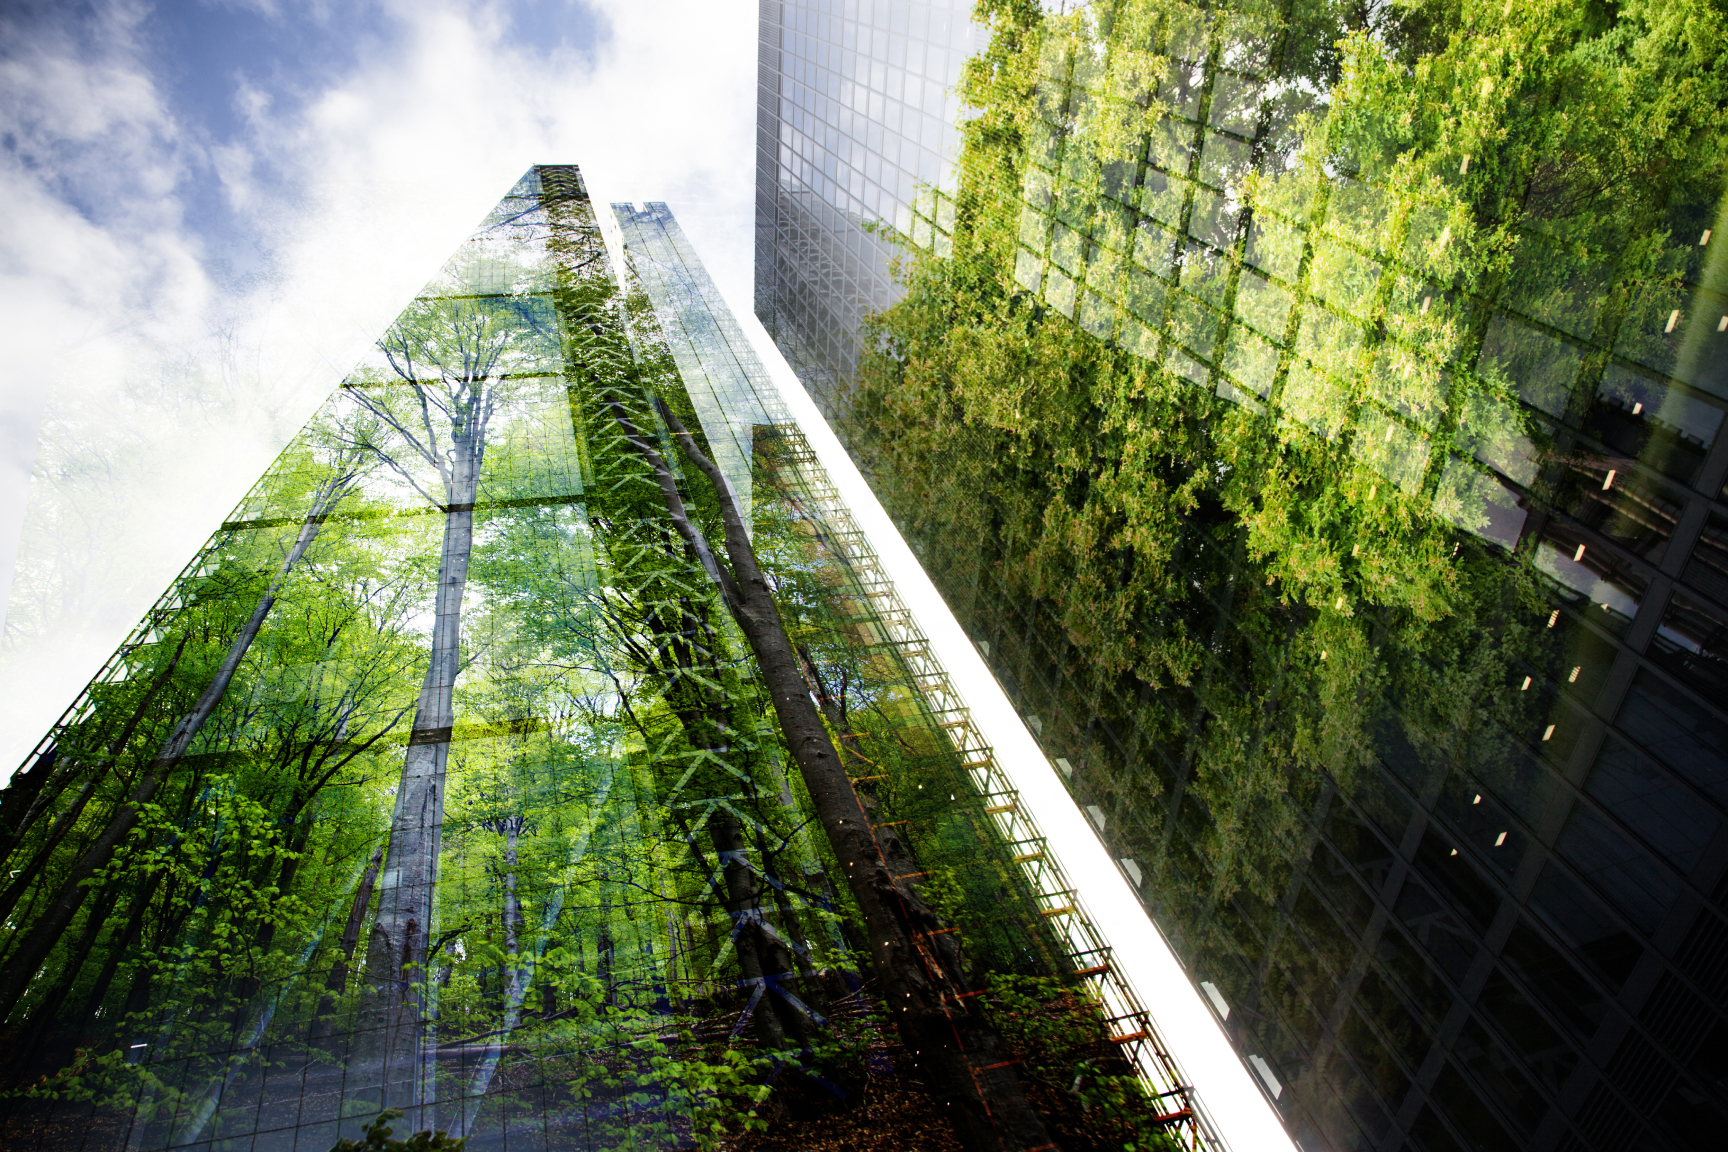 Office buildings with trees superimposed on the glass